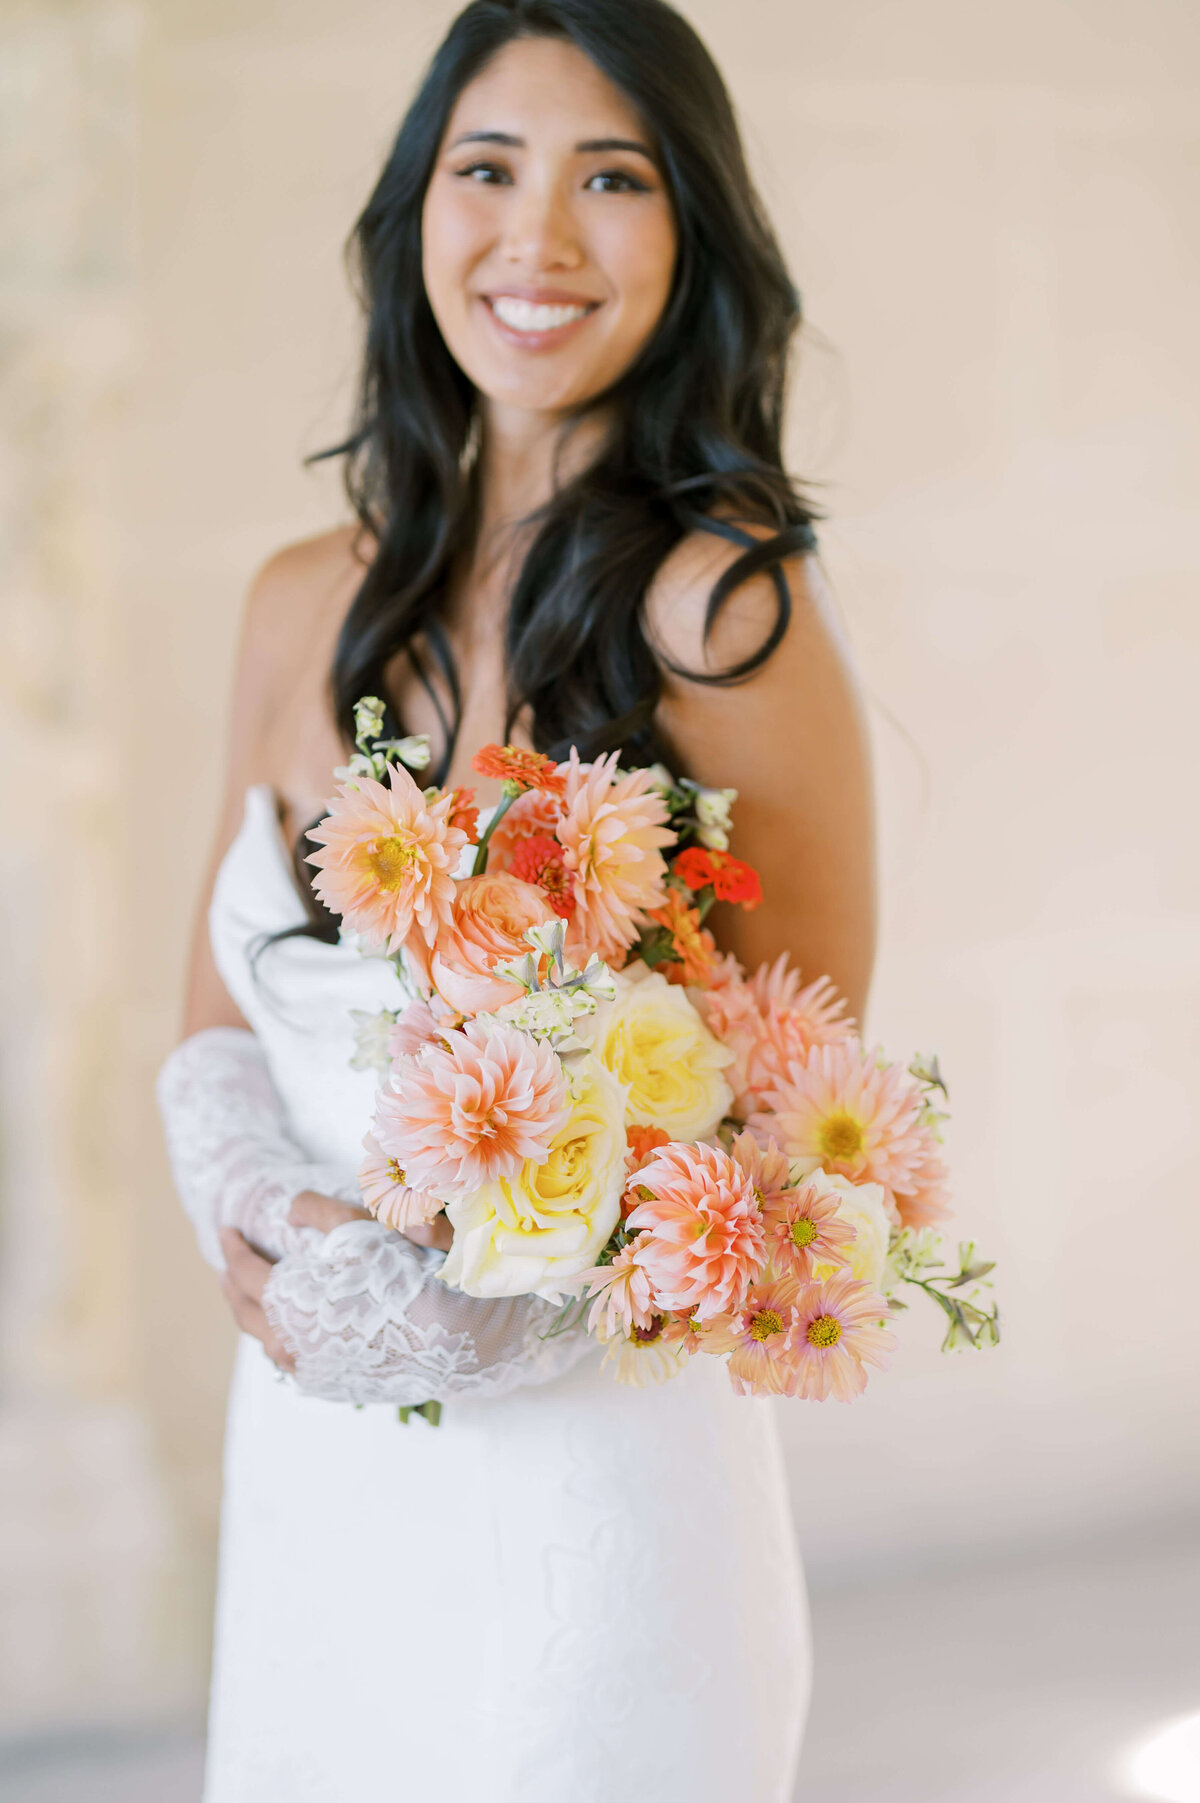 Bride smiling for a portrait while holding her peach colored bridal bouquet created by a DC wedding florist.